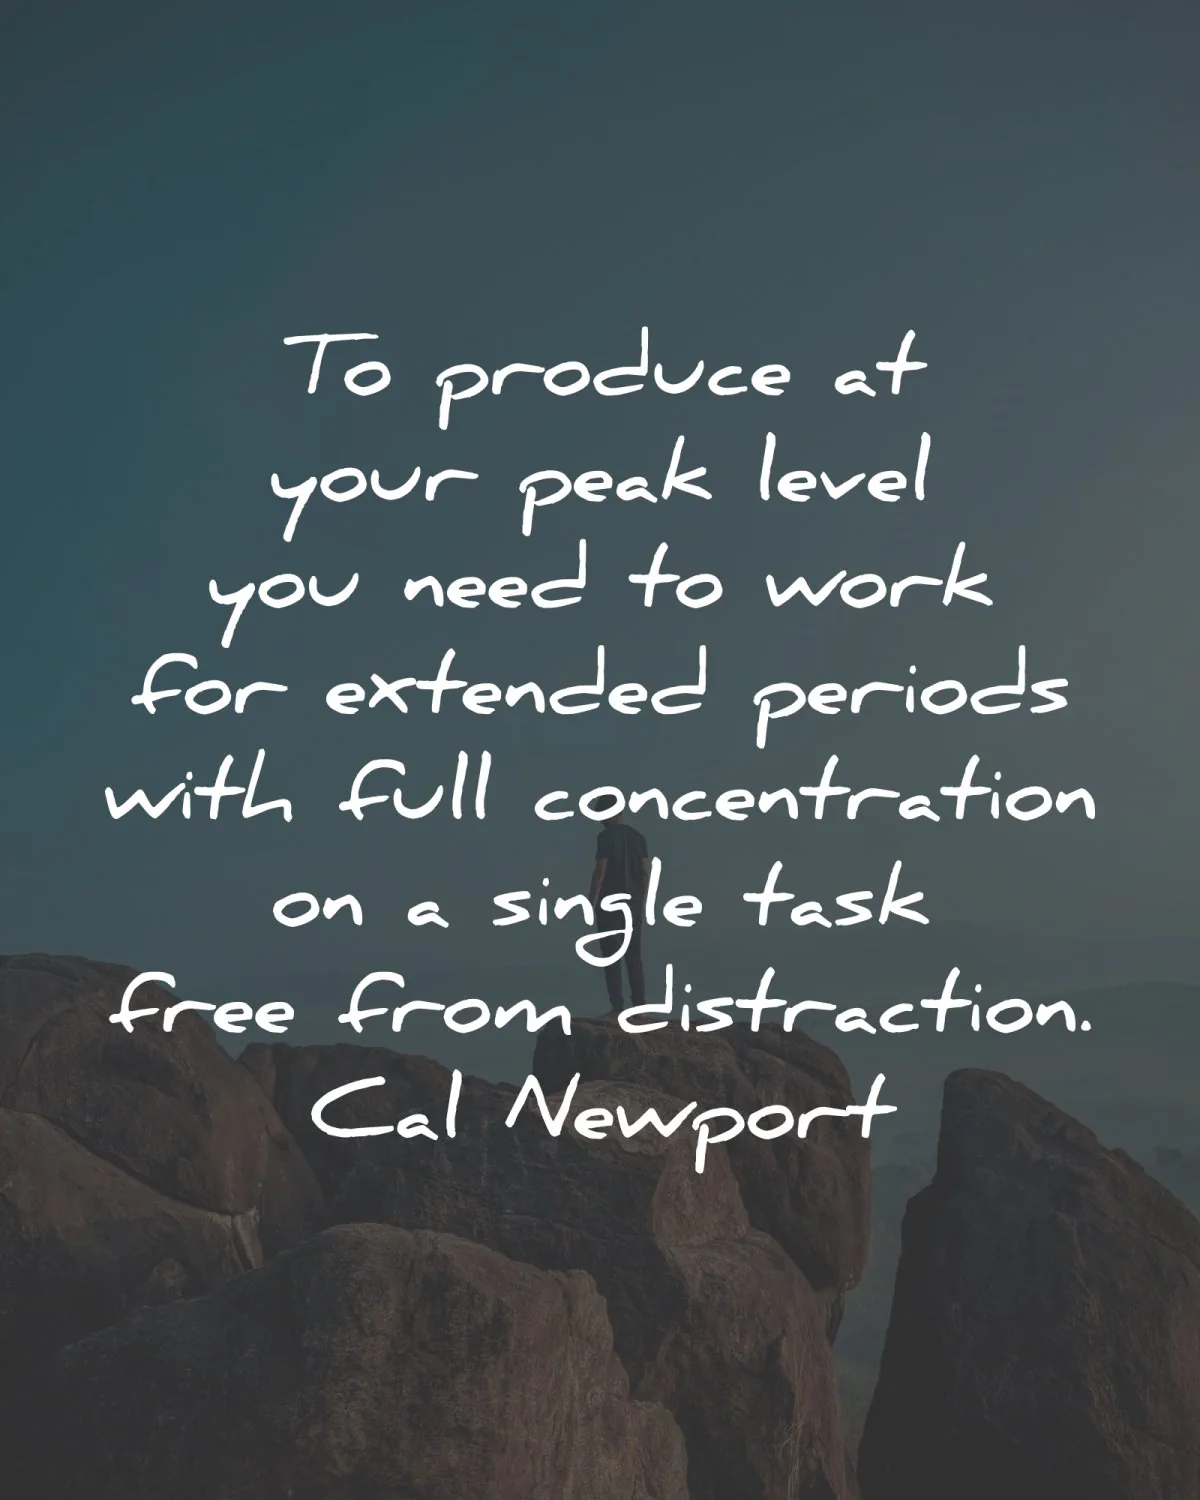 cal newport quotes produce peak level work concentration wisdom